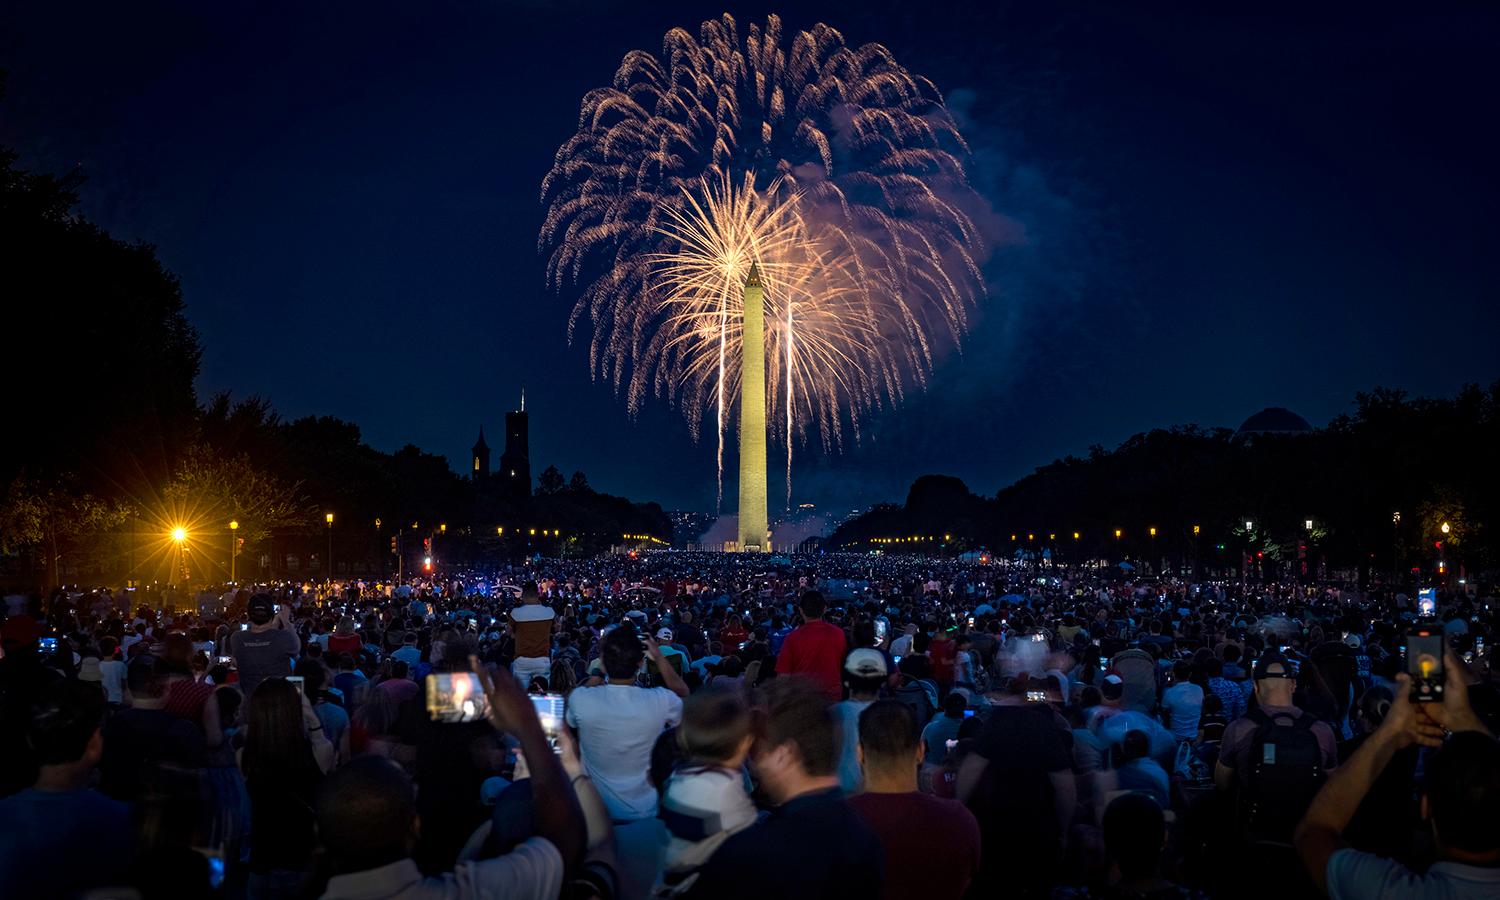 People fill the National Mall to watch the fireworks display during Independence Day celebrations on July 4, 2021, in Washington. (Photo by Samuel Corum/Getty Images)